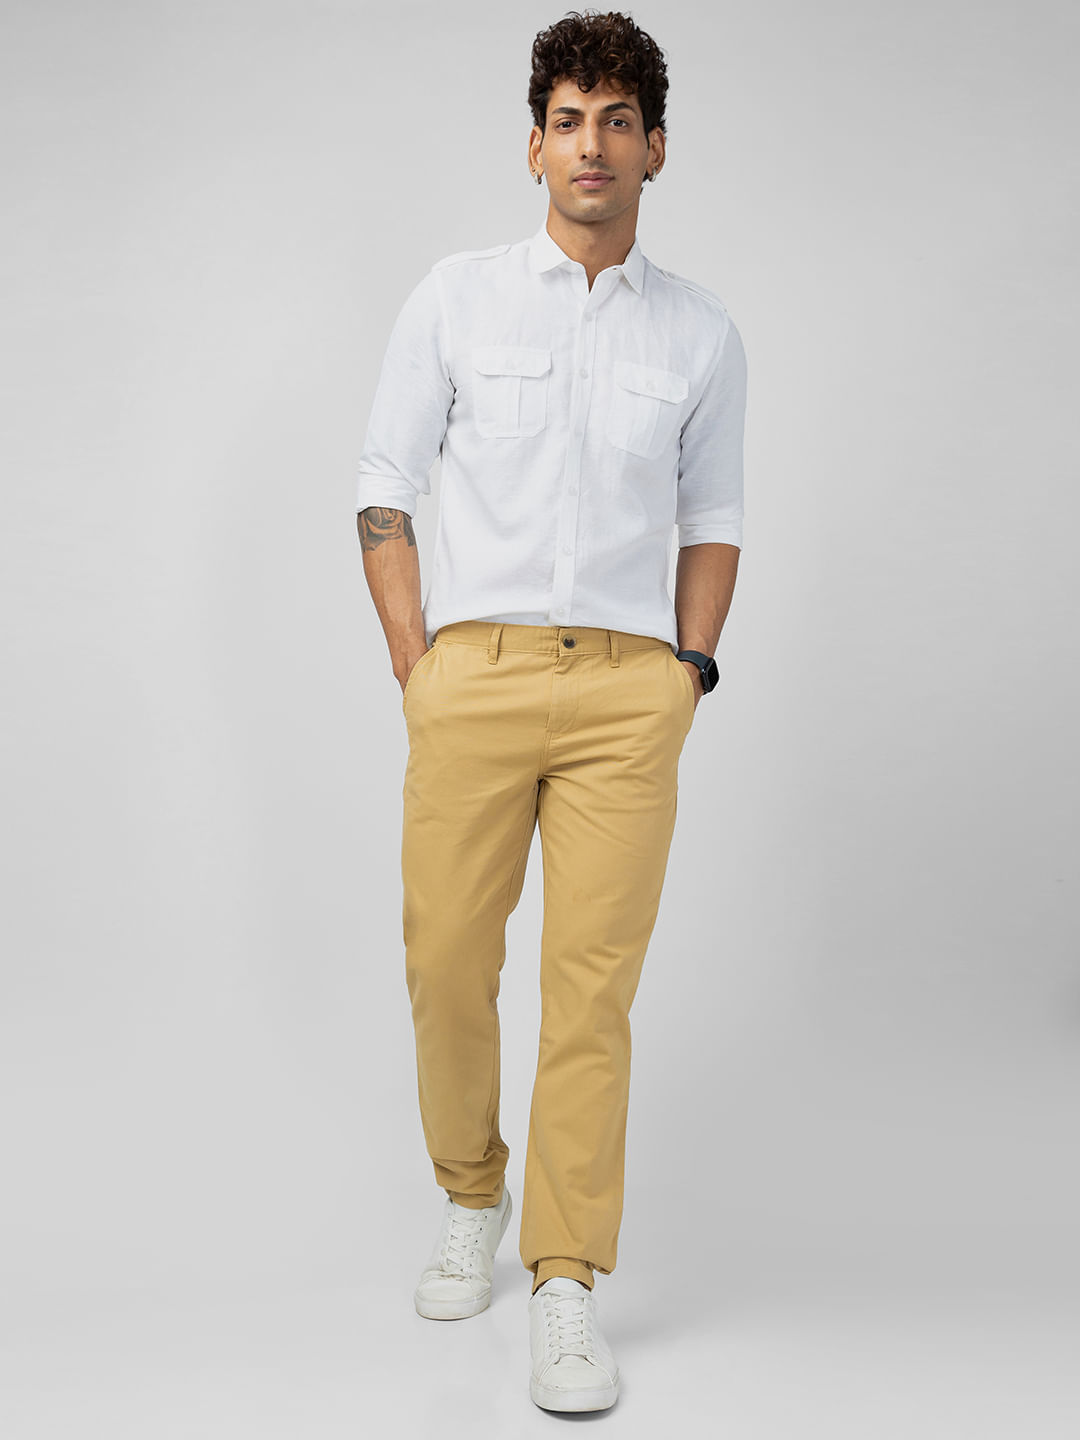 Casual Trousers in Light Khaki colour - urban clothing co.